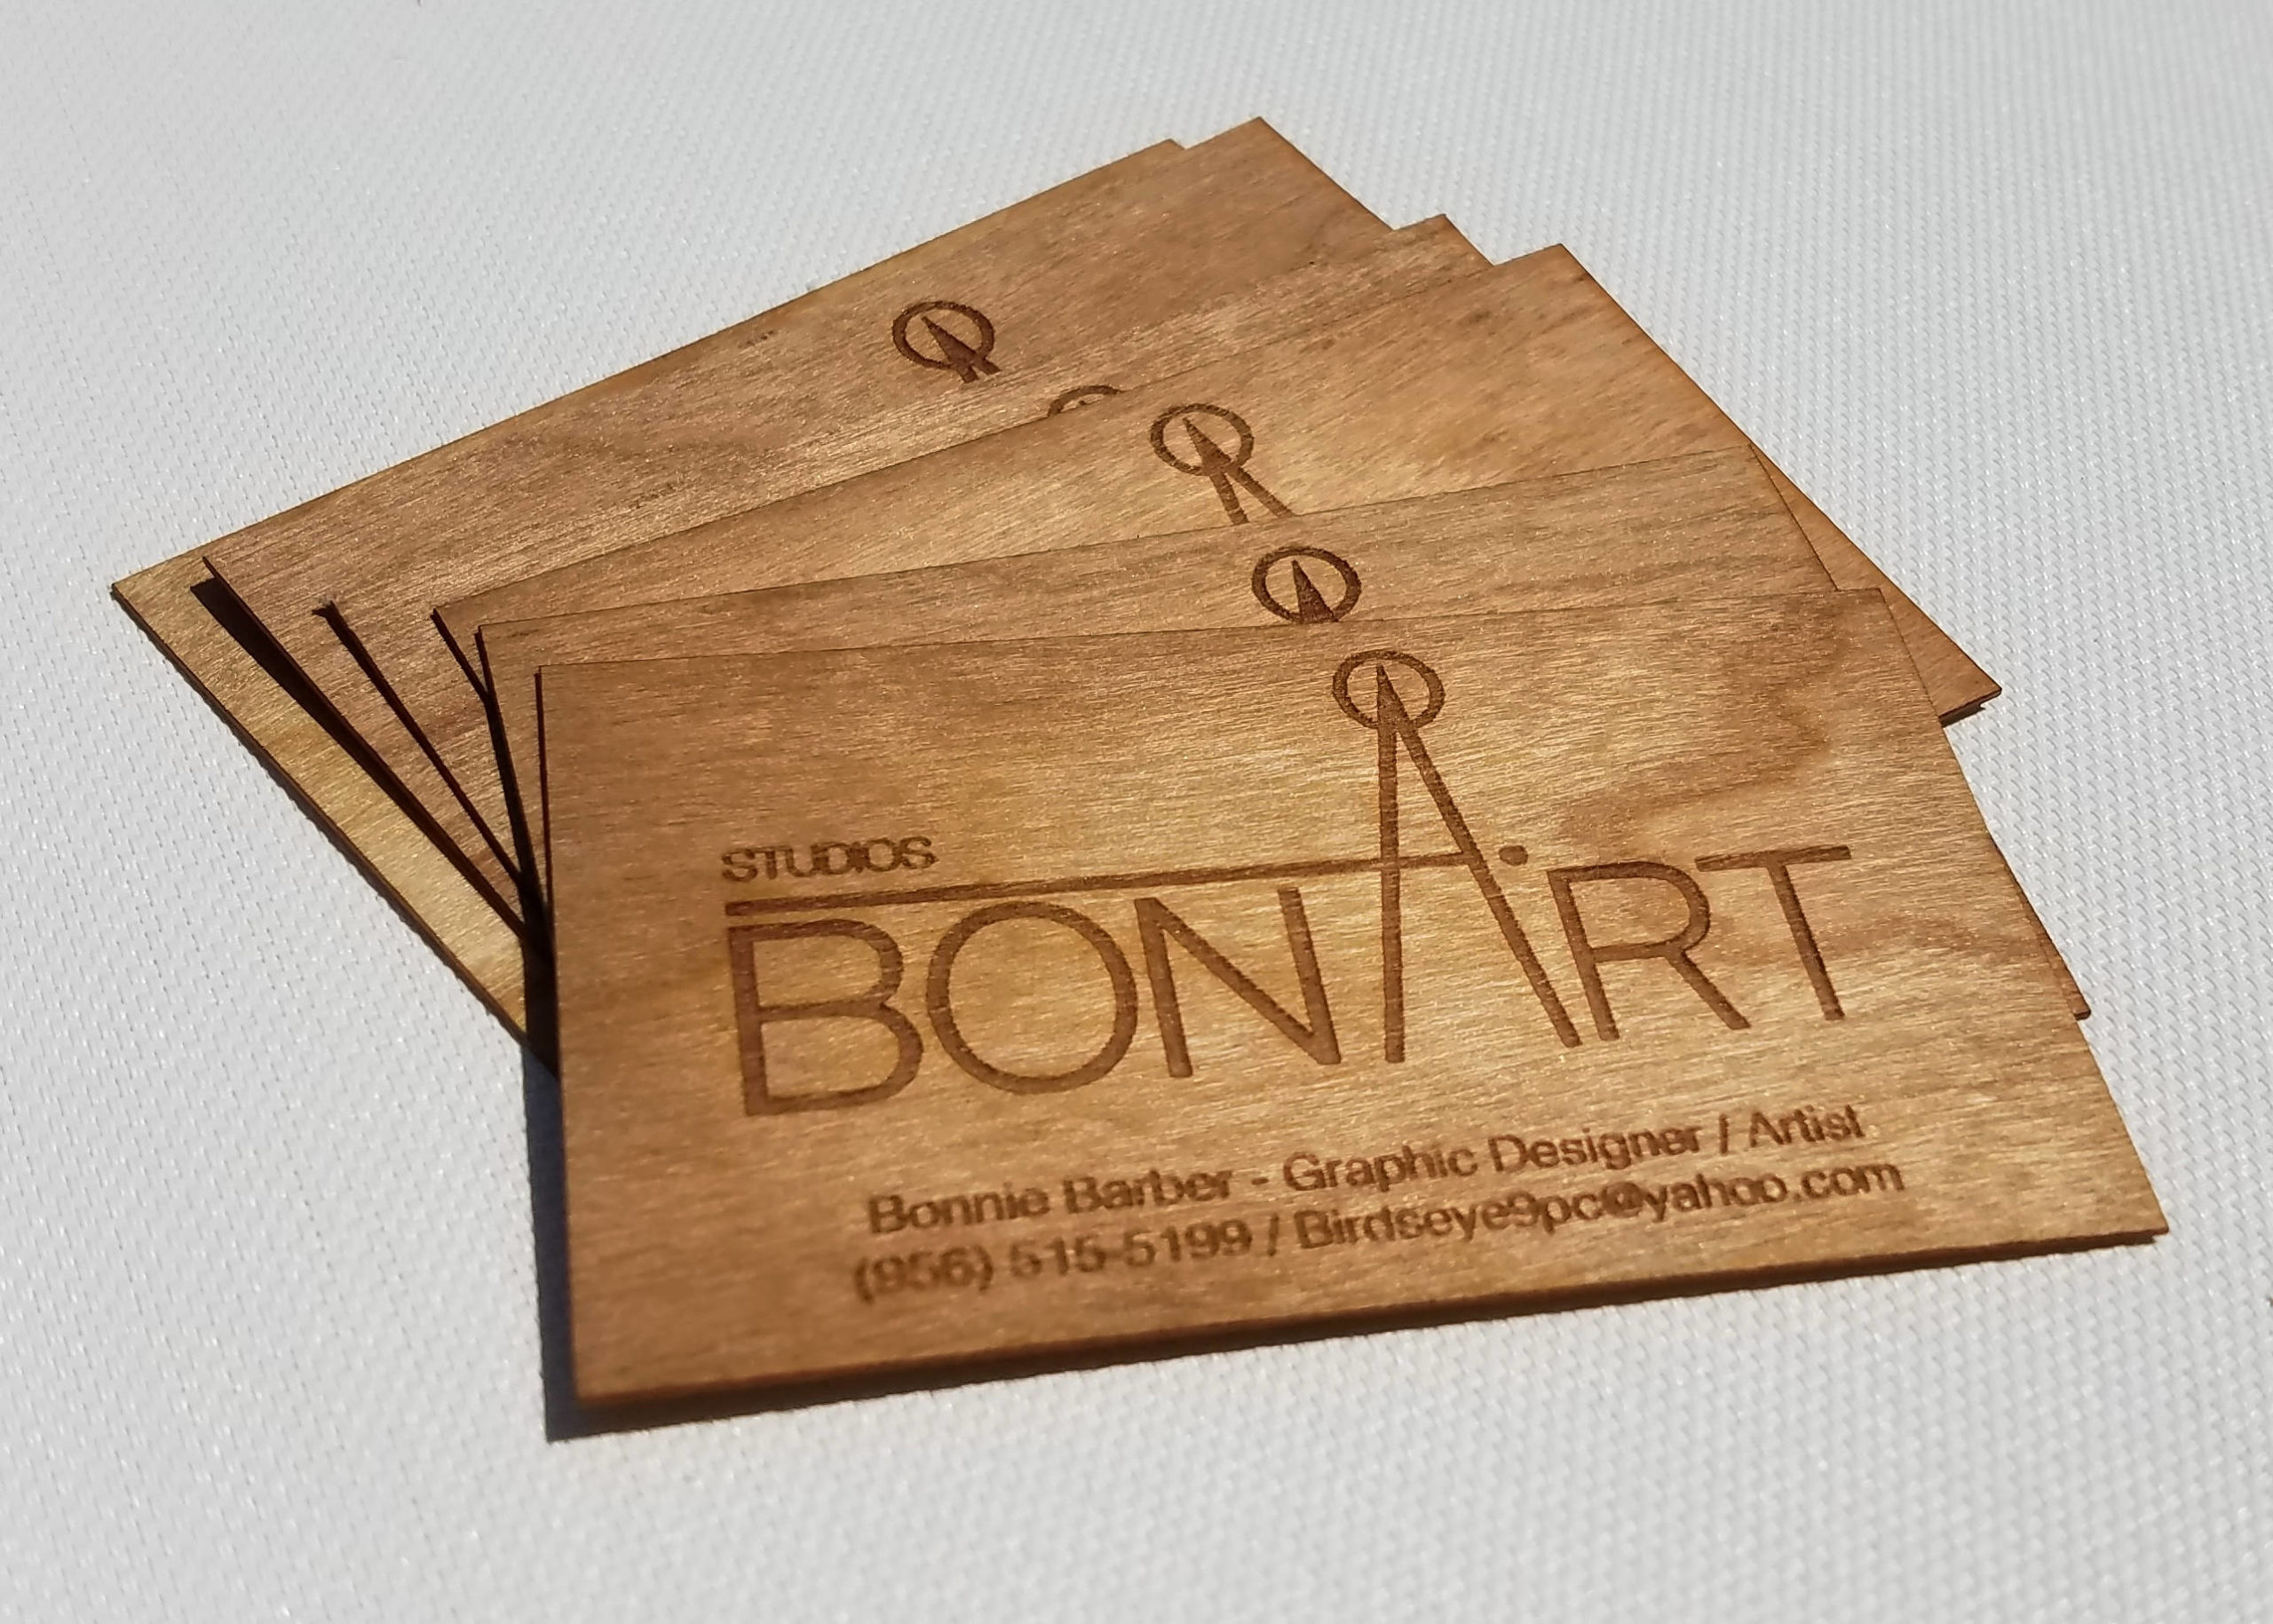 painters business cards examples 6